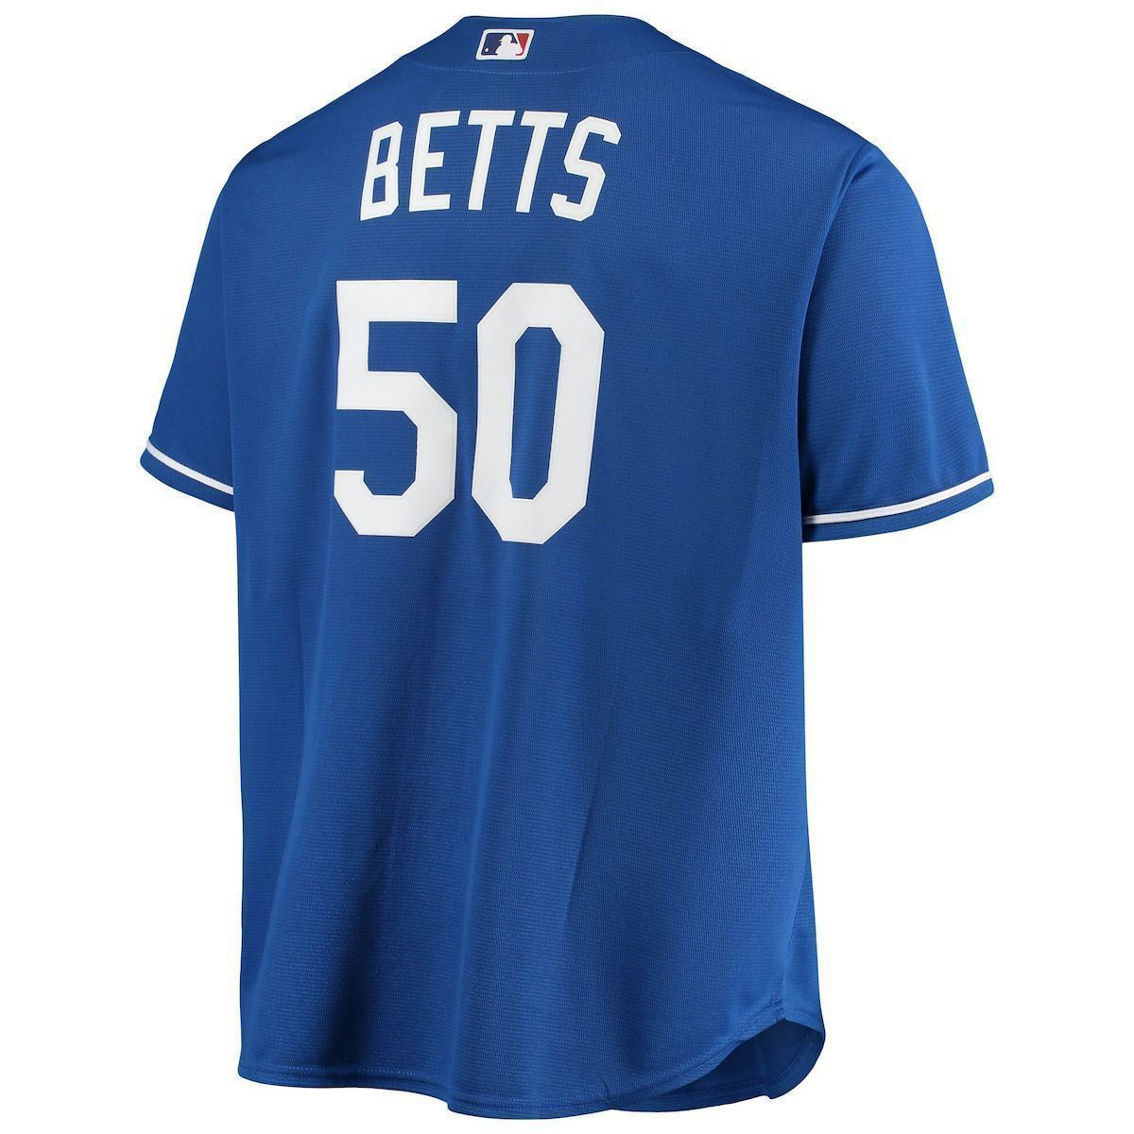 Majestic Men's Mookie Betts Royal Los Angeles Dodgers Big & Tall Replica Player Jersey - Image 4 of 4